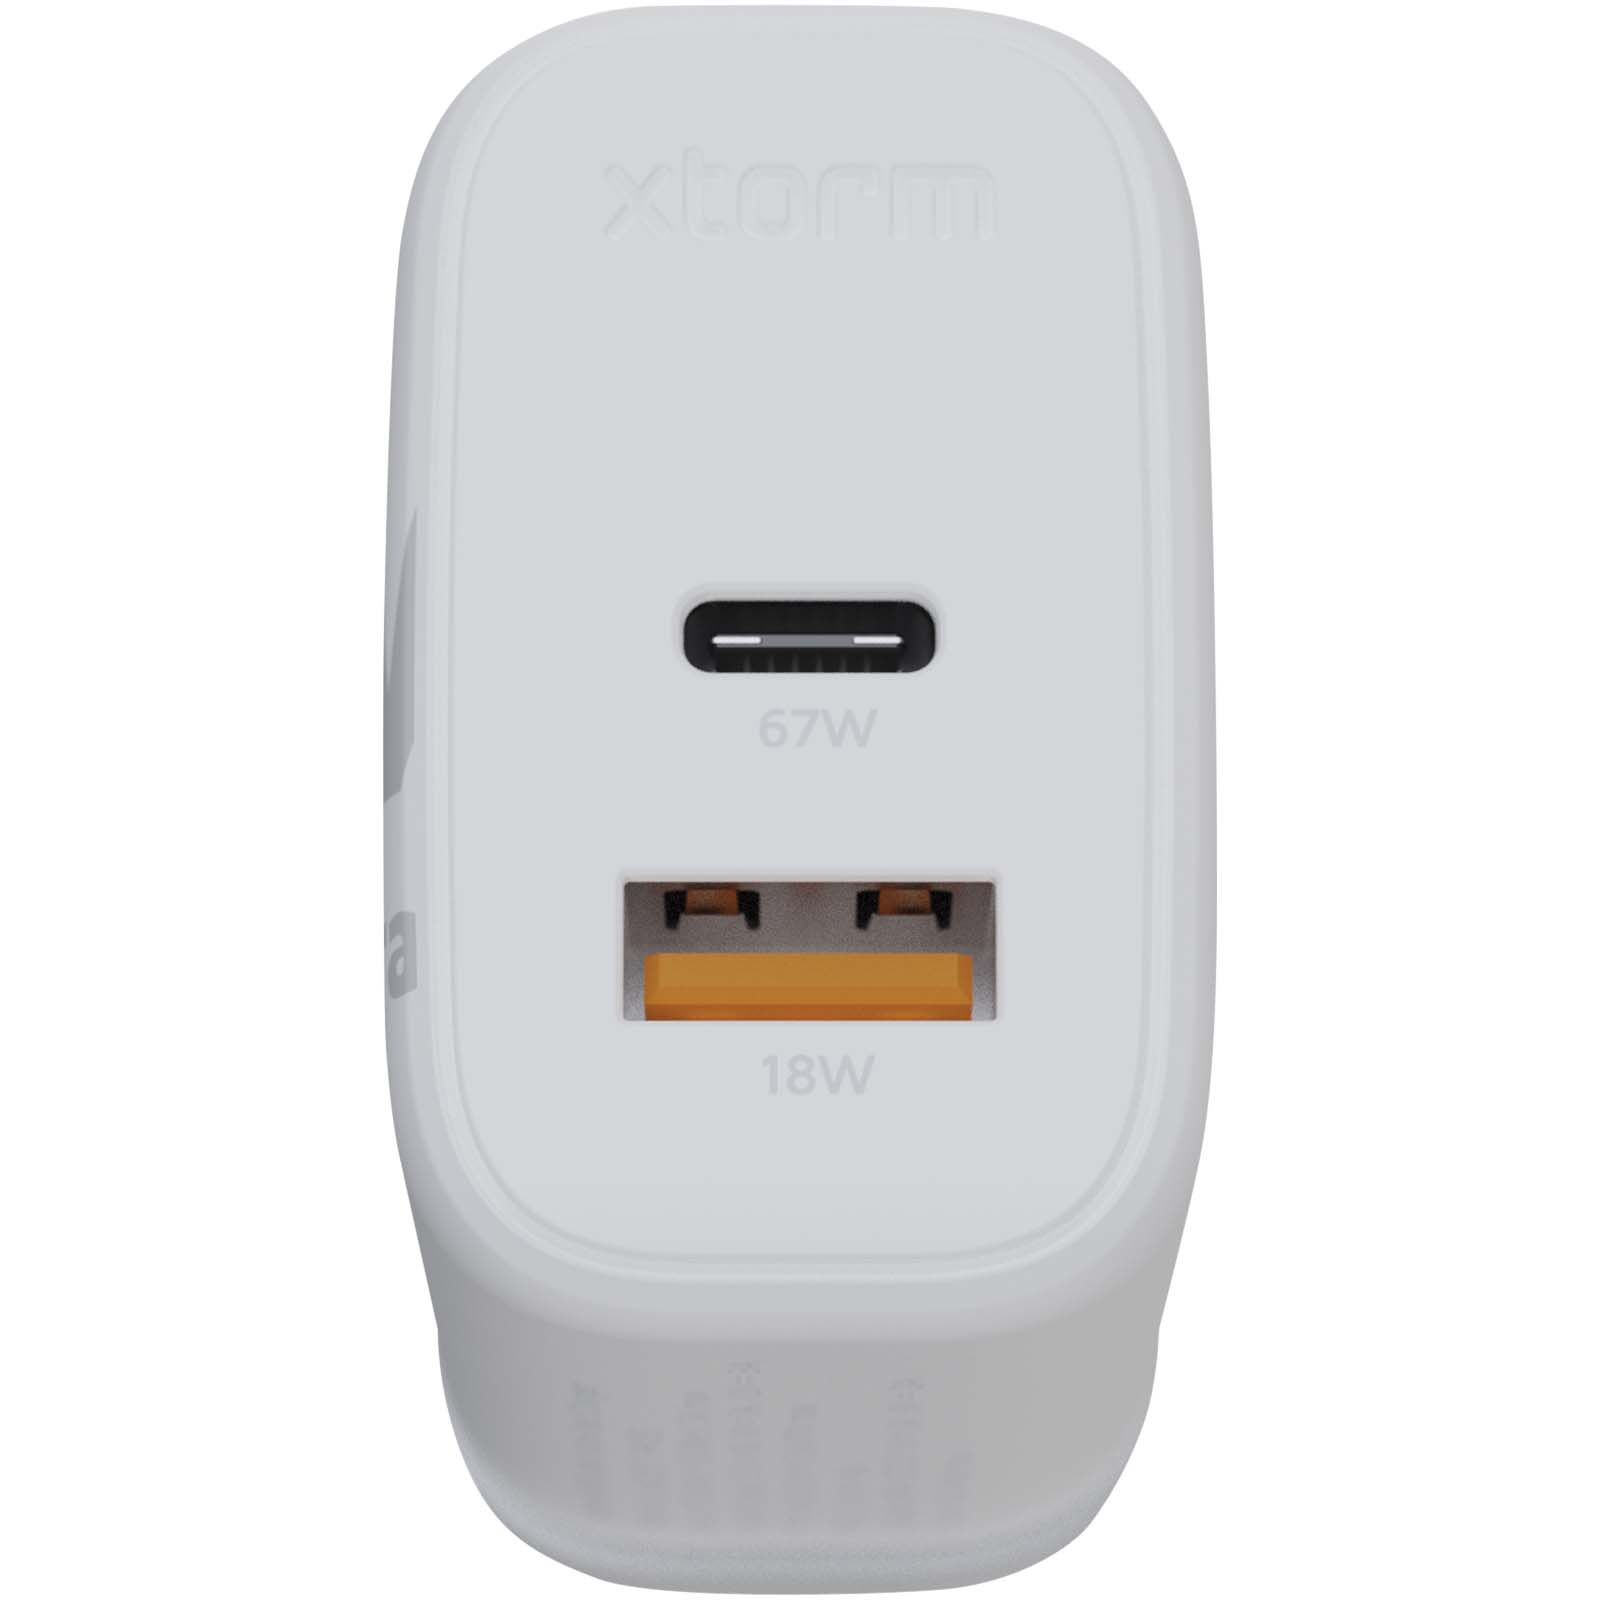 Advertising Chargers - Xtorm XEC067G GaN² Ultra 67W wall charger - UK plug - 3